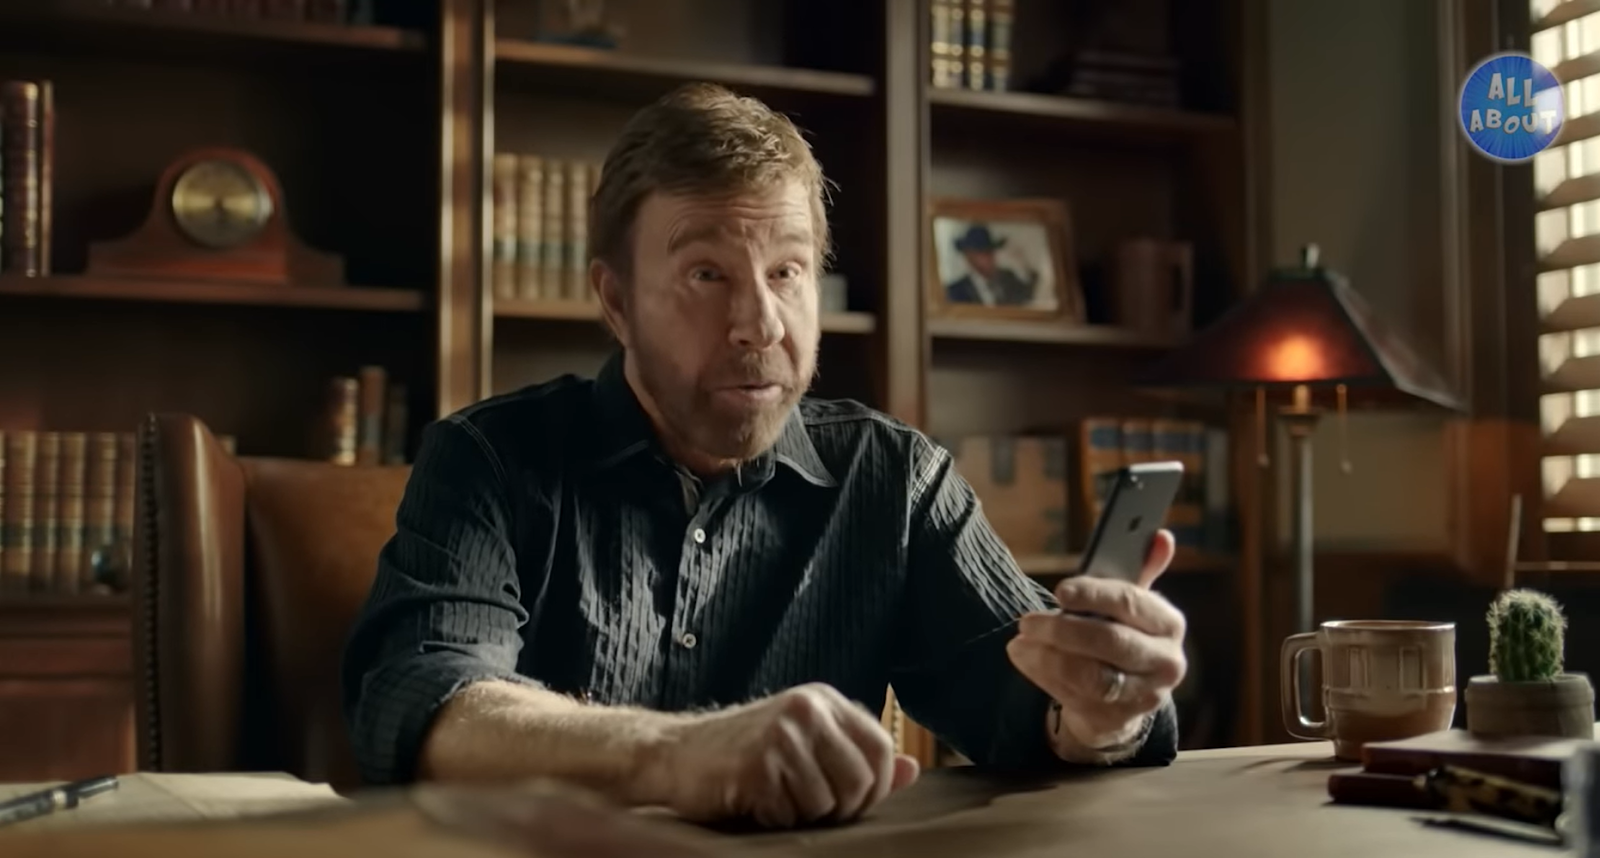 Chuck Norris sitting at the table holding the phone in his left hand and looking forward